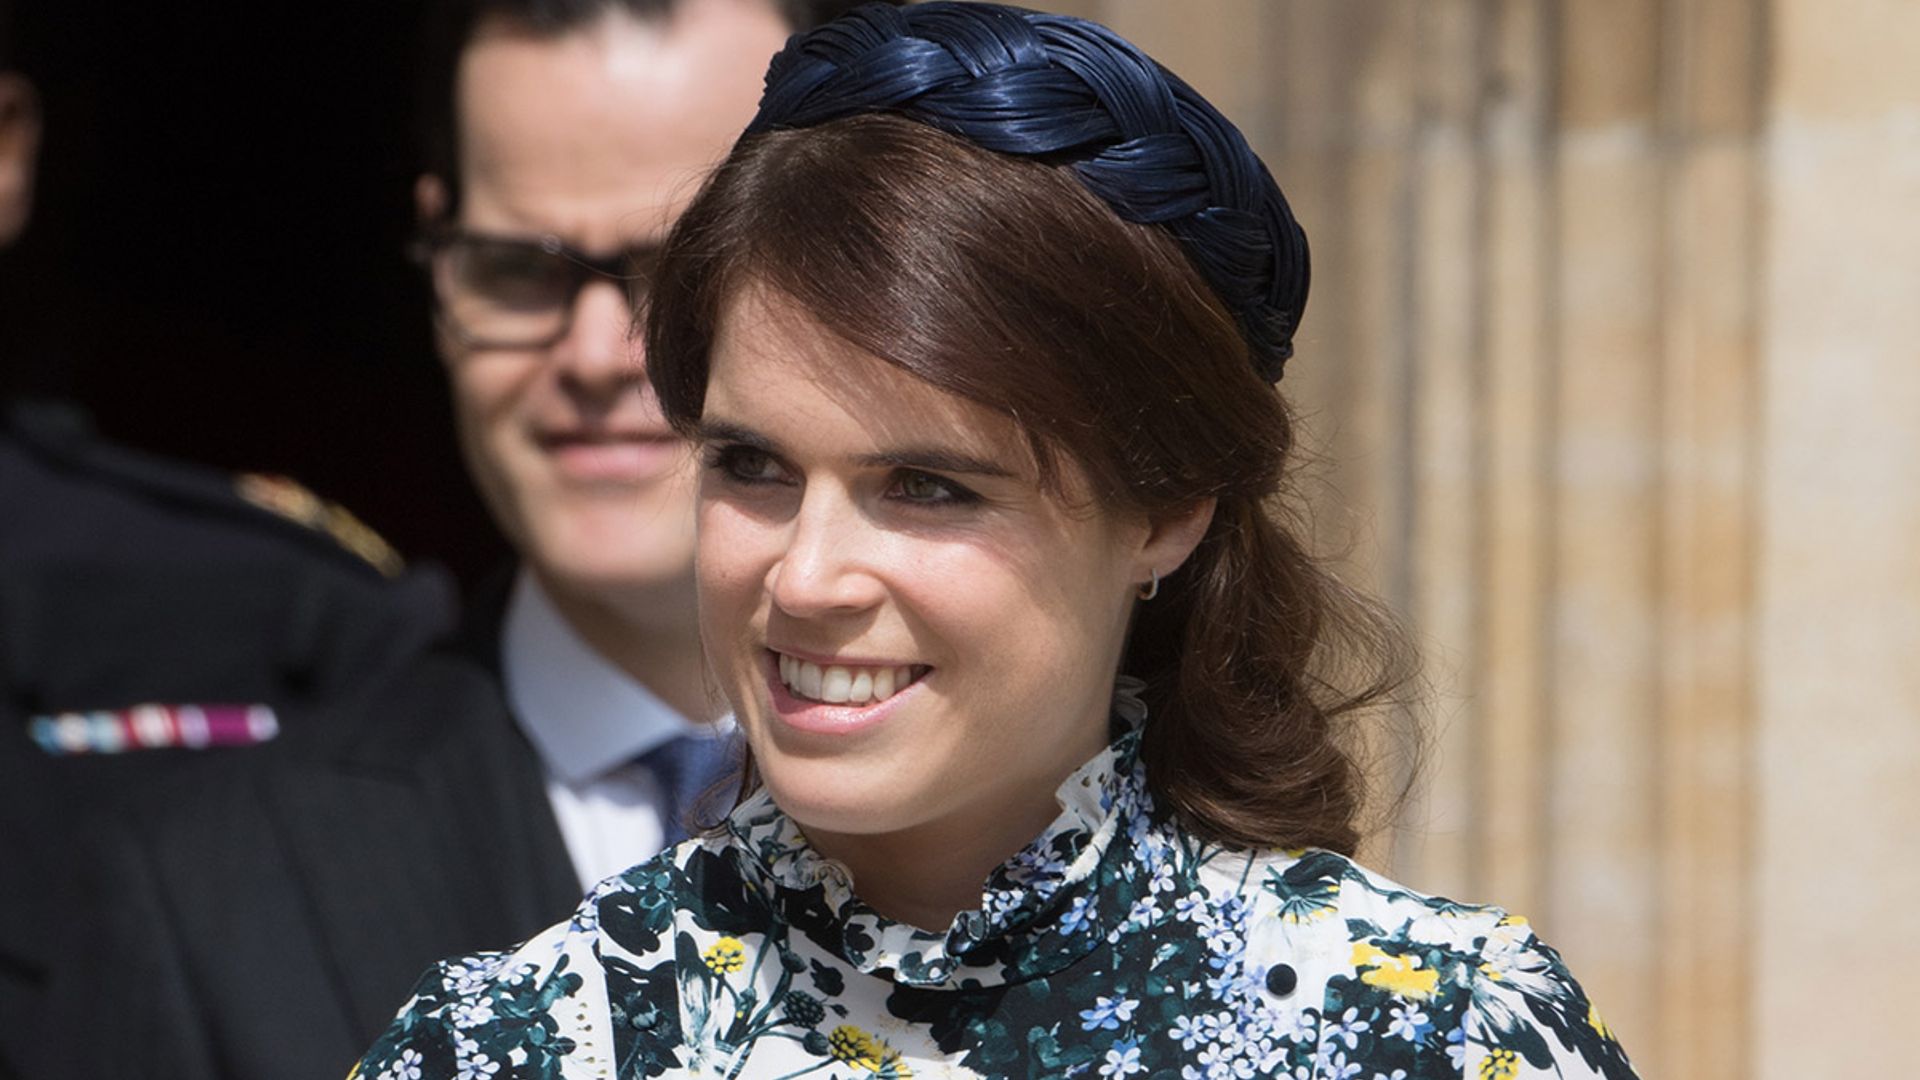 Princess Eugenie looks dazzling in fitted blazer for special appearance